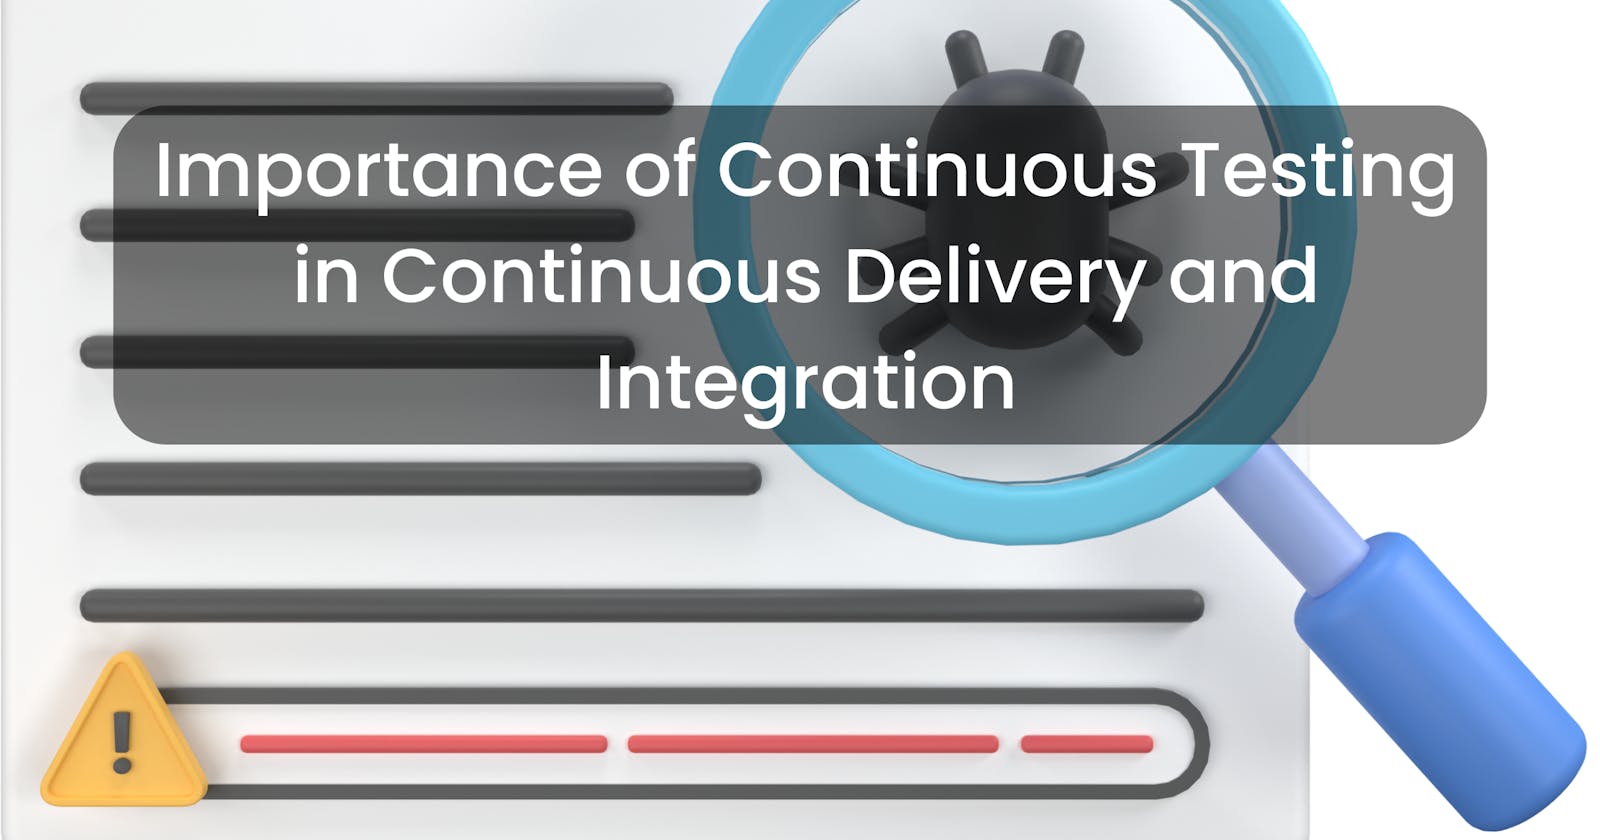 Importance of Continuous Testing in Continuous Delivery and Integration